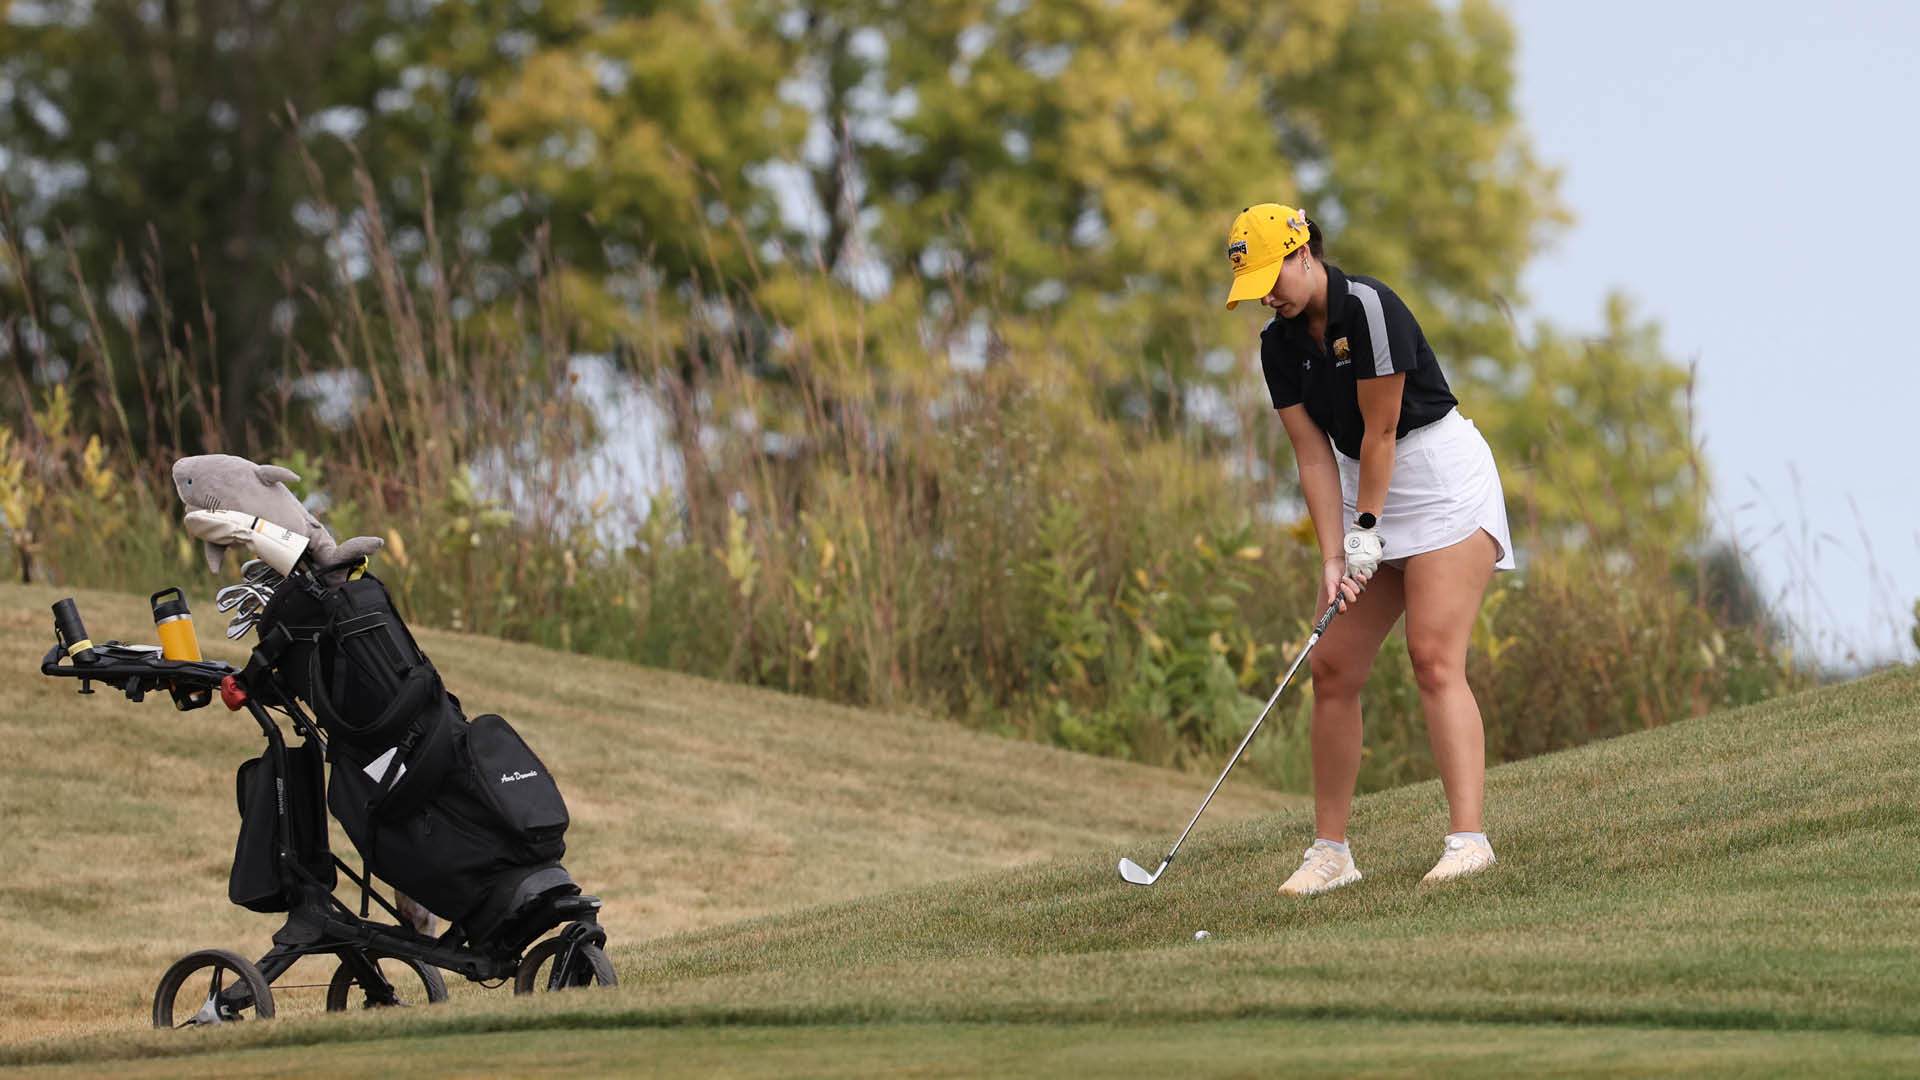 Downie led the Titans with 141 total strokes at the UW-Stevens Point Mad Dawg Invitational